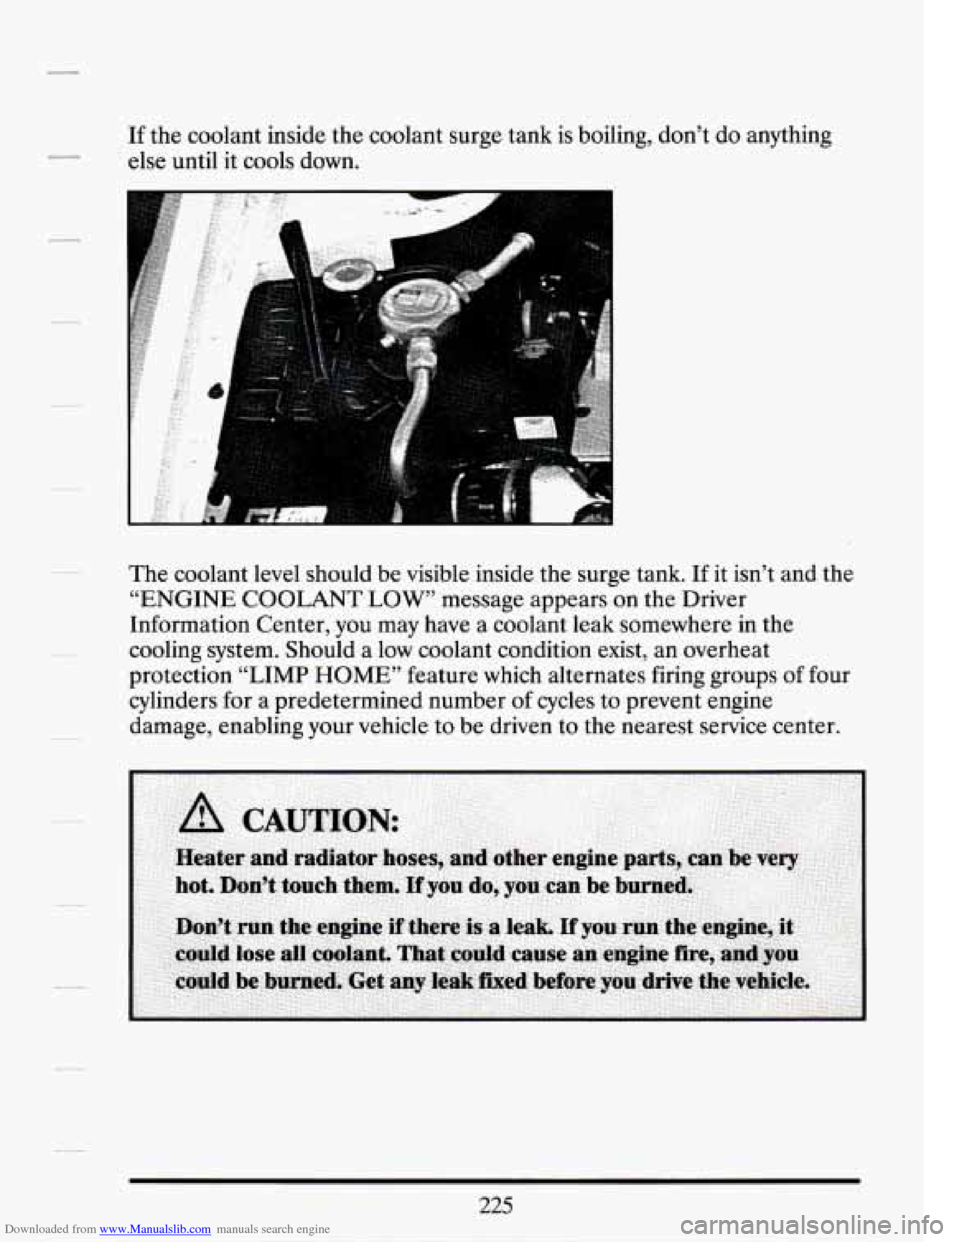 CADILLAC SEVILLE 1994 4.G Owners Manual Downloaded from www.Manualslib.com manuals search engine If the  coolant  inside the coolant surge tank  is  boiling,  don’t do anything 
else  until  it  cools  down. 
r 
The coolant level should  